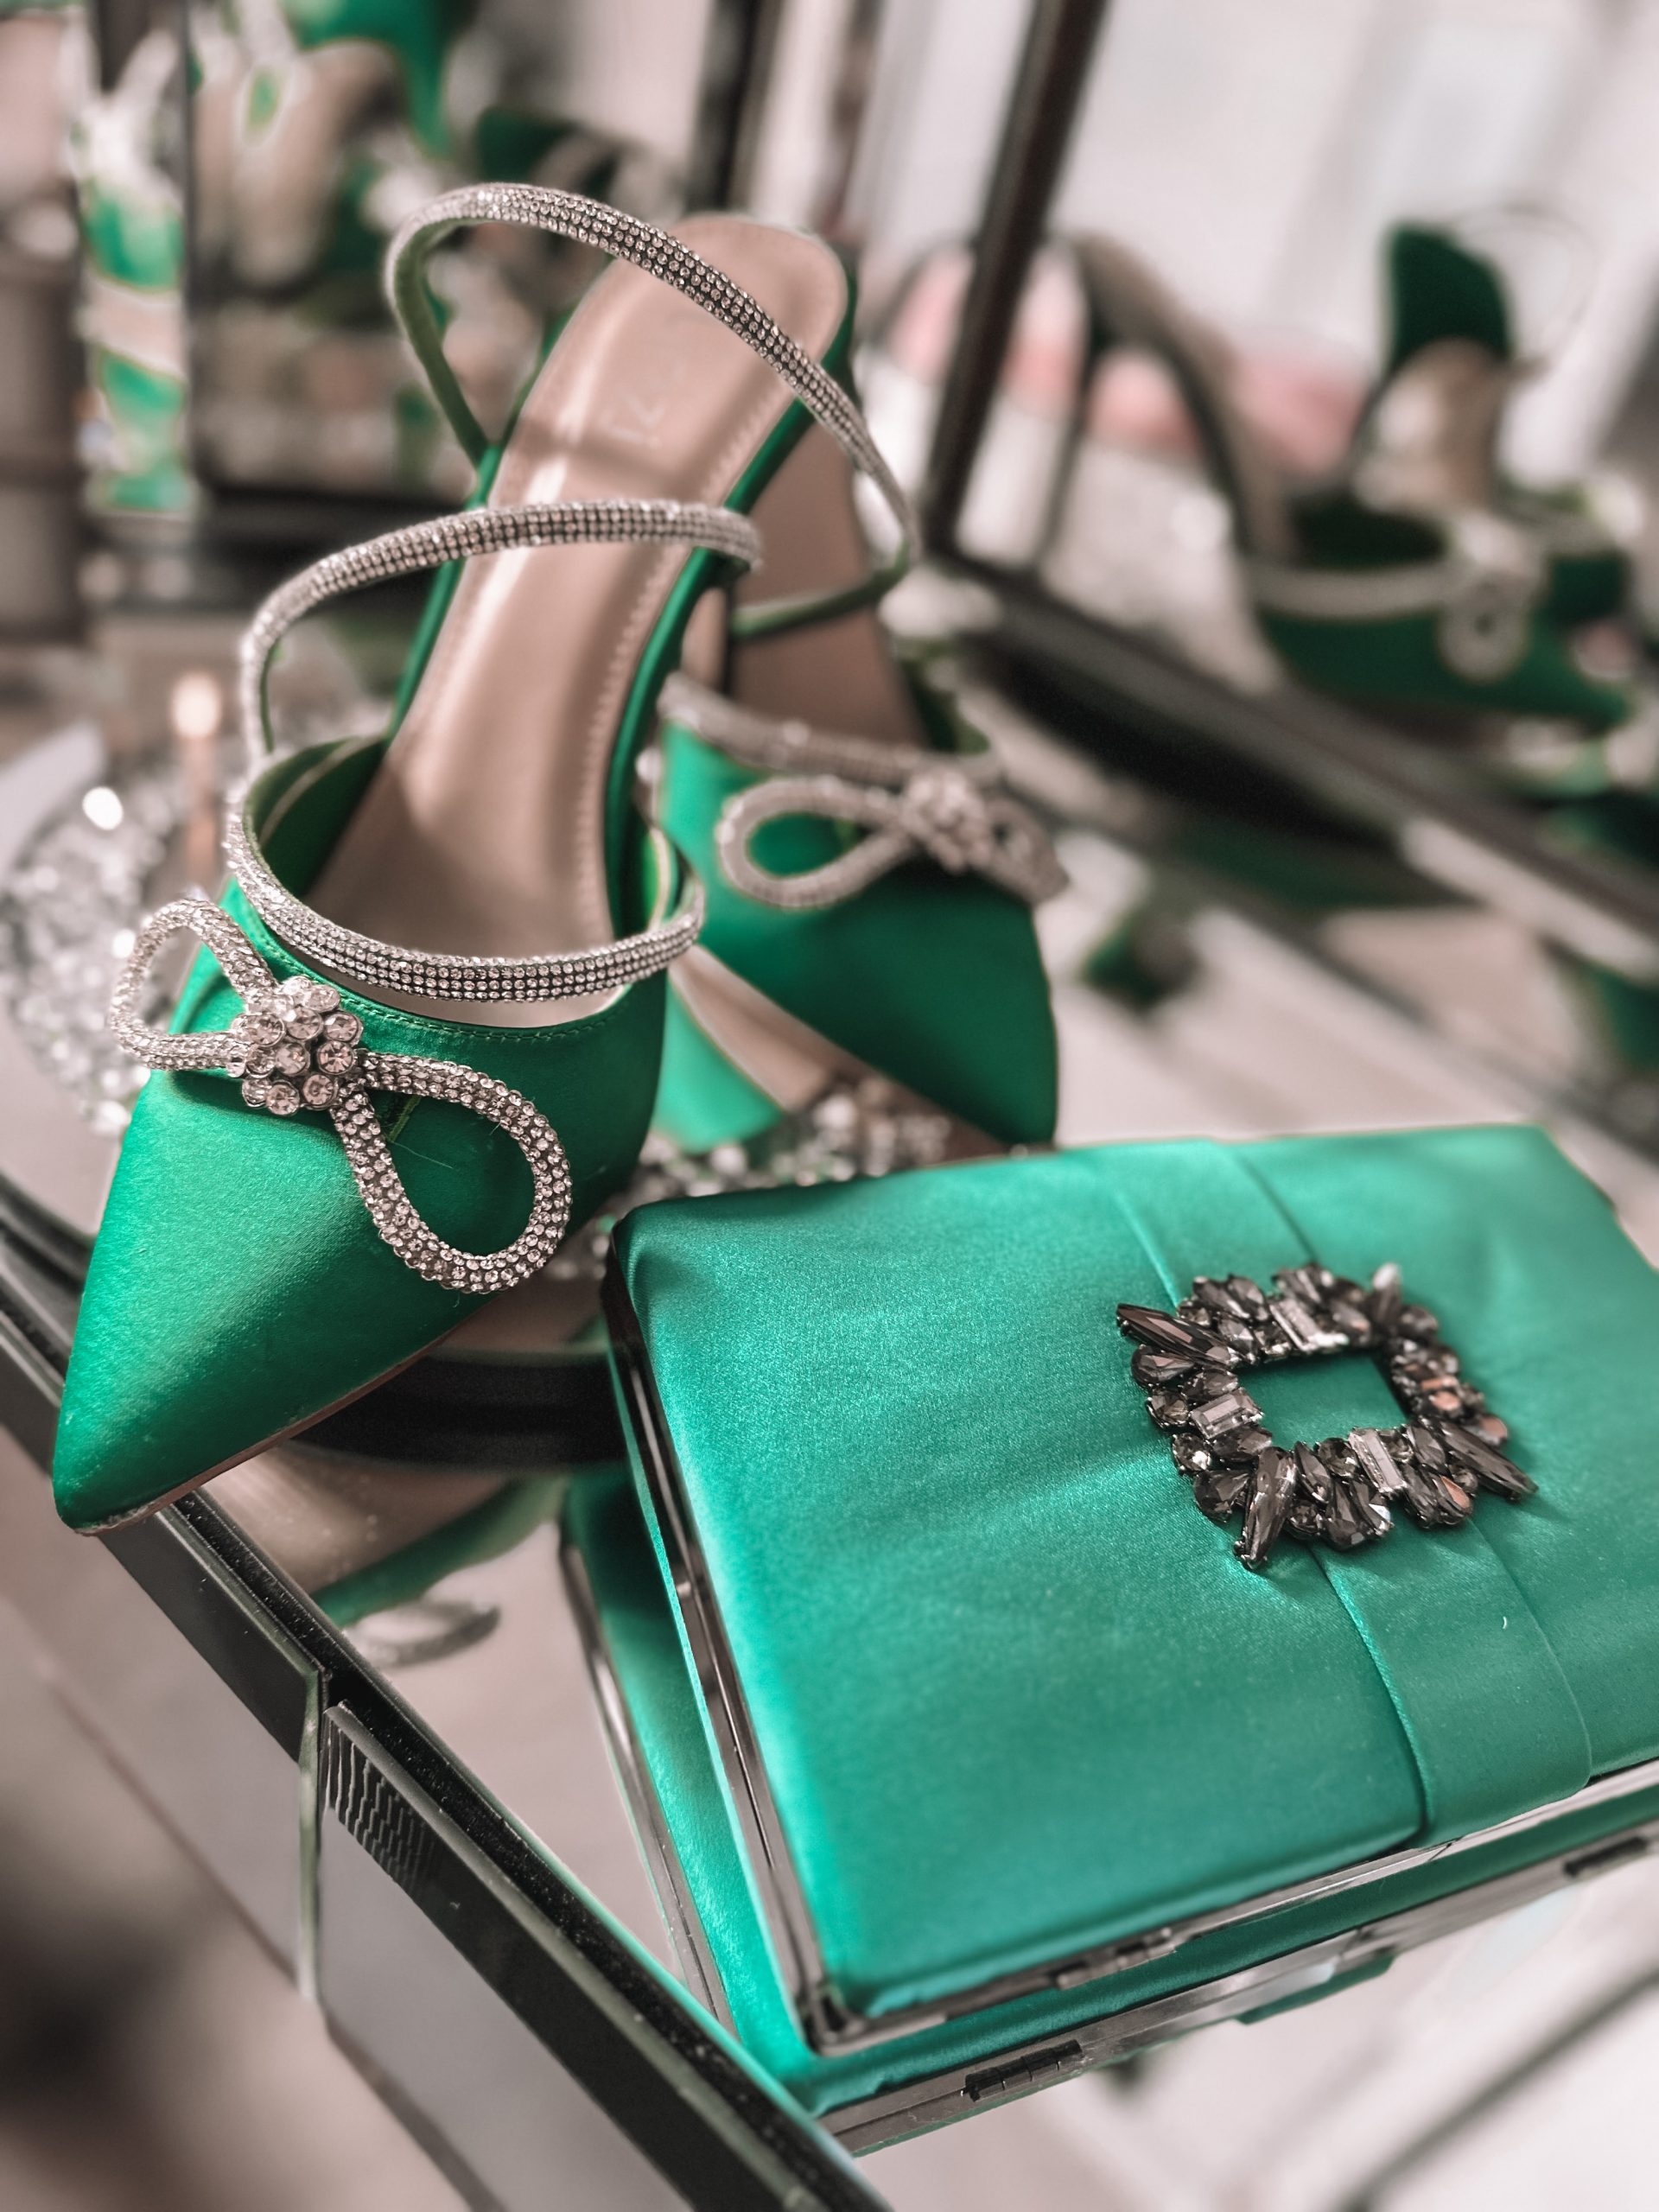 Linzi Forever Court Heeled Sandal With Diamante Bow Trim, Moda In Pelle Green Box Clutch With Diamante Trim